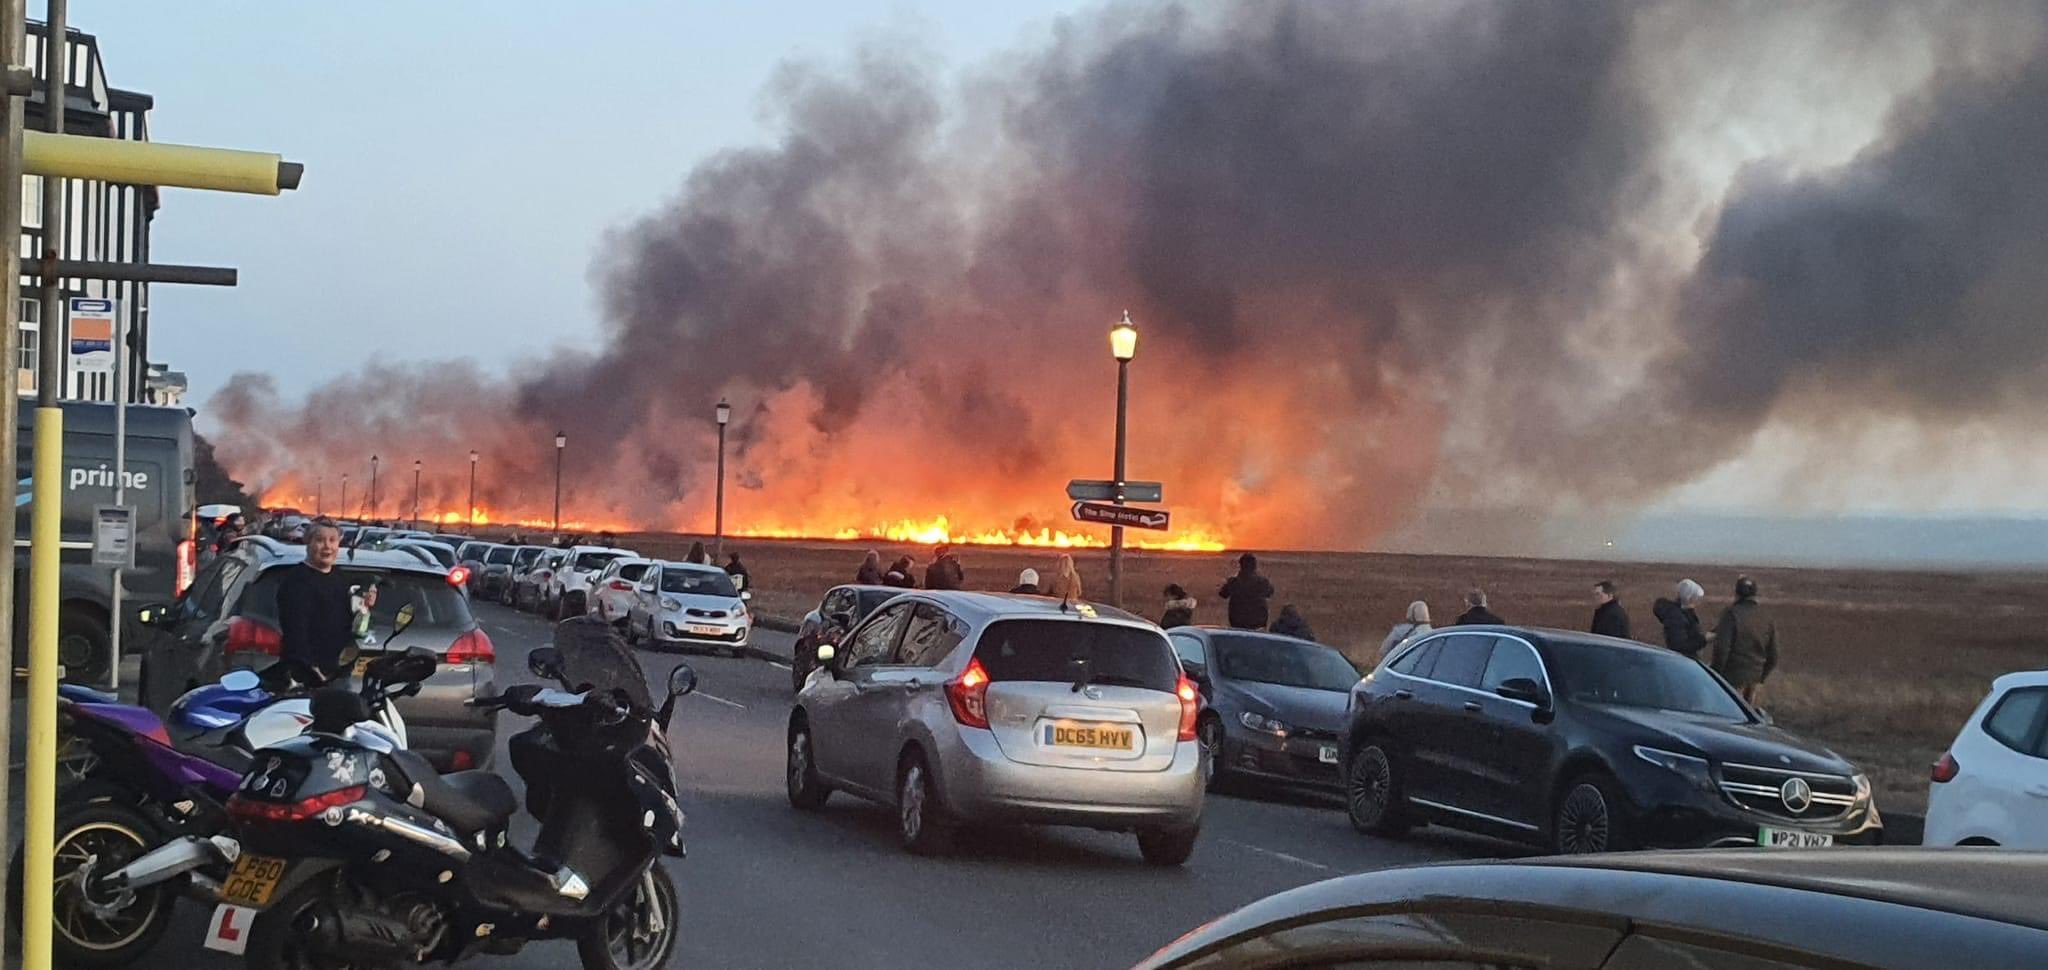 A wildfire takes hold on marshland close to Parkgate (pic: @DaviesKatie)